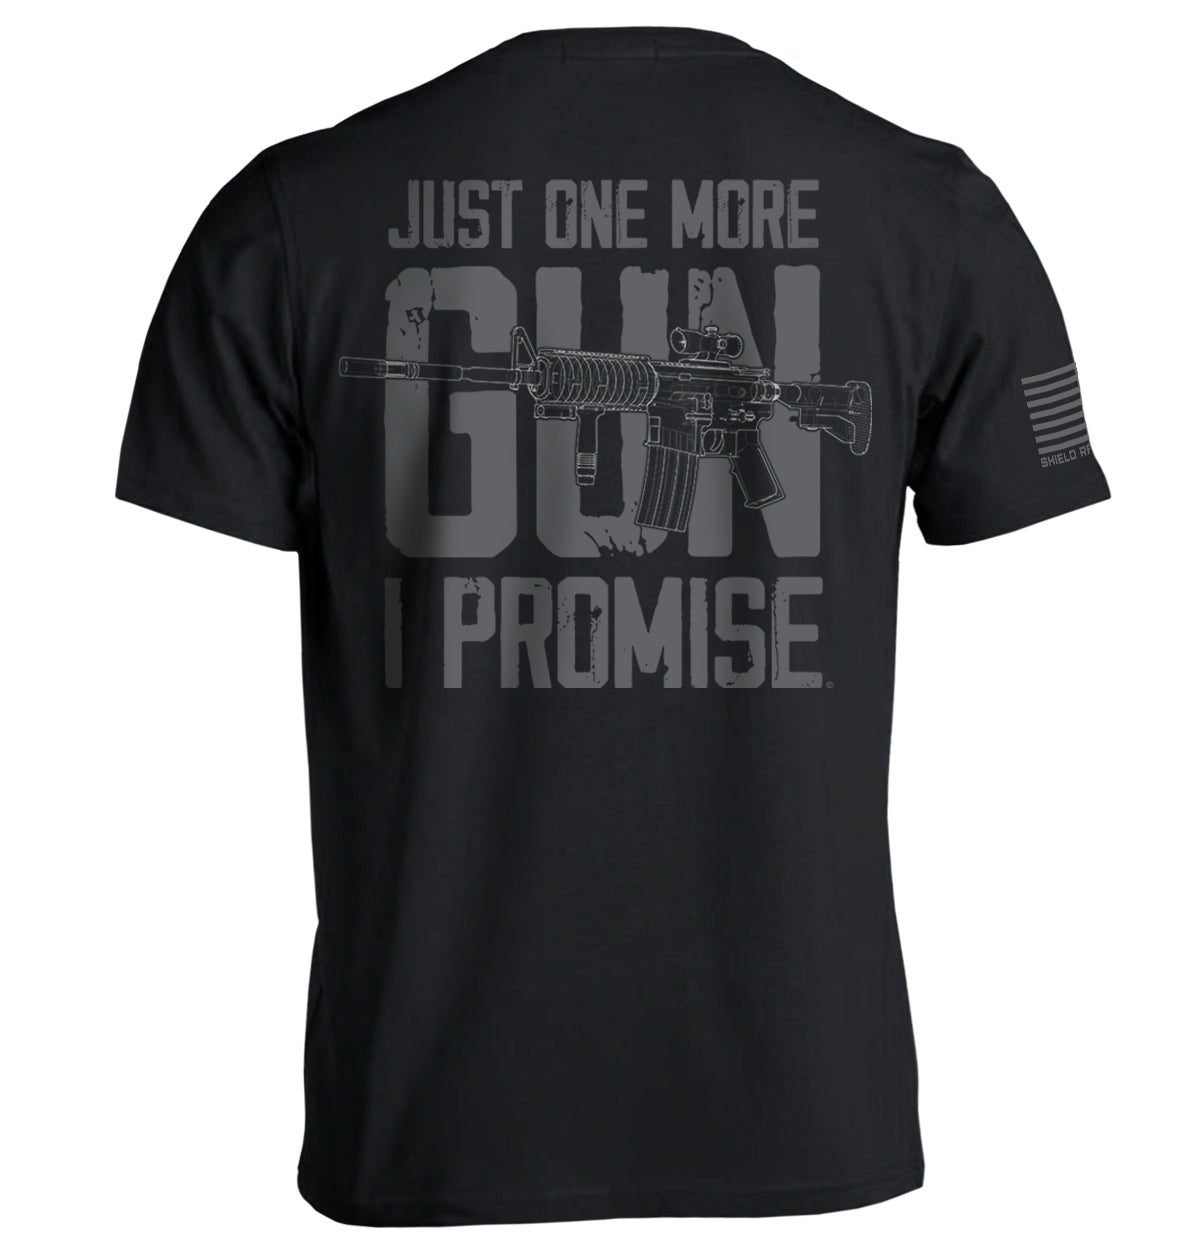 Just One More Gun I Promise Tee